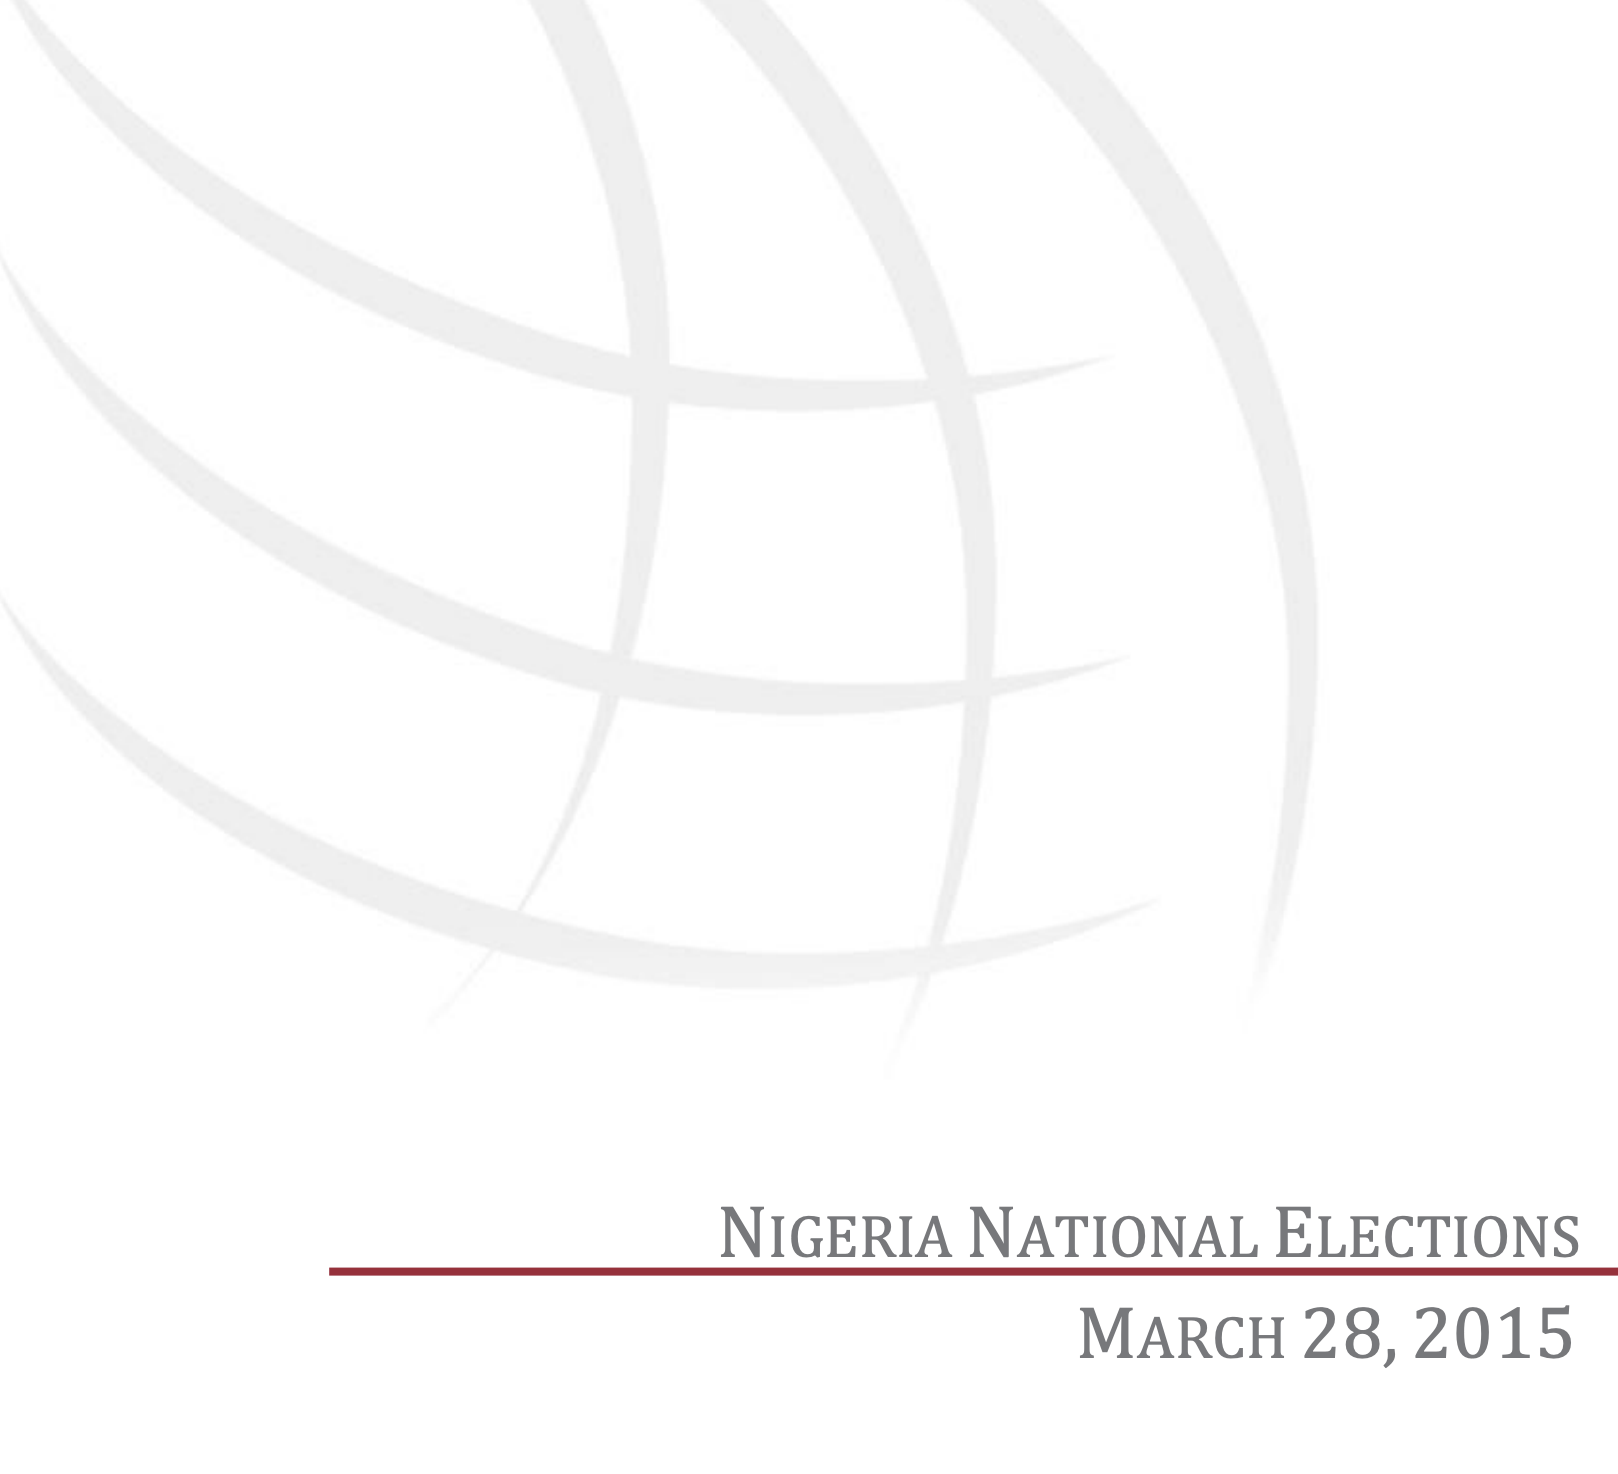 NIGERIA NATIONAL ELECTIONS MARCH 28, 2015